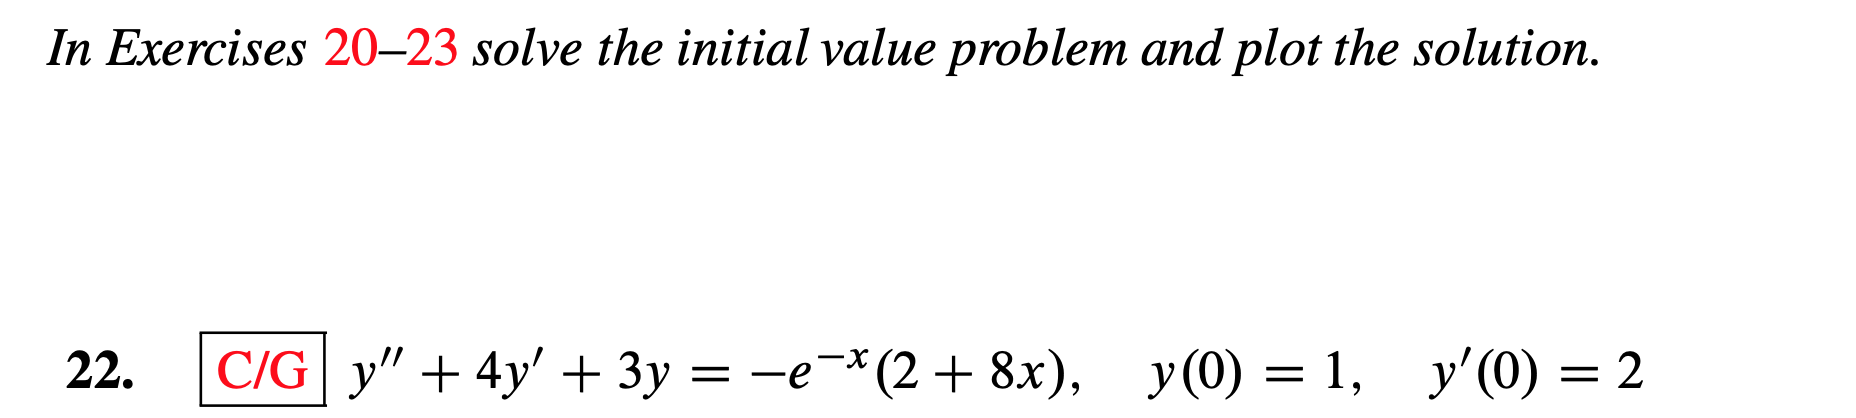 In Exercises 20-23 solve the initial value problem and plot the solution.
у" + 4y' + 3у %3D-е-*(2+ 8х),
у'(0) — 2
22.
у(0) — 1,
